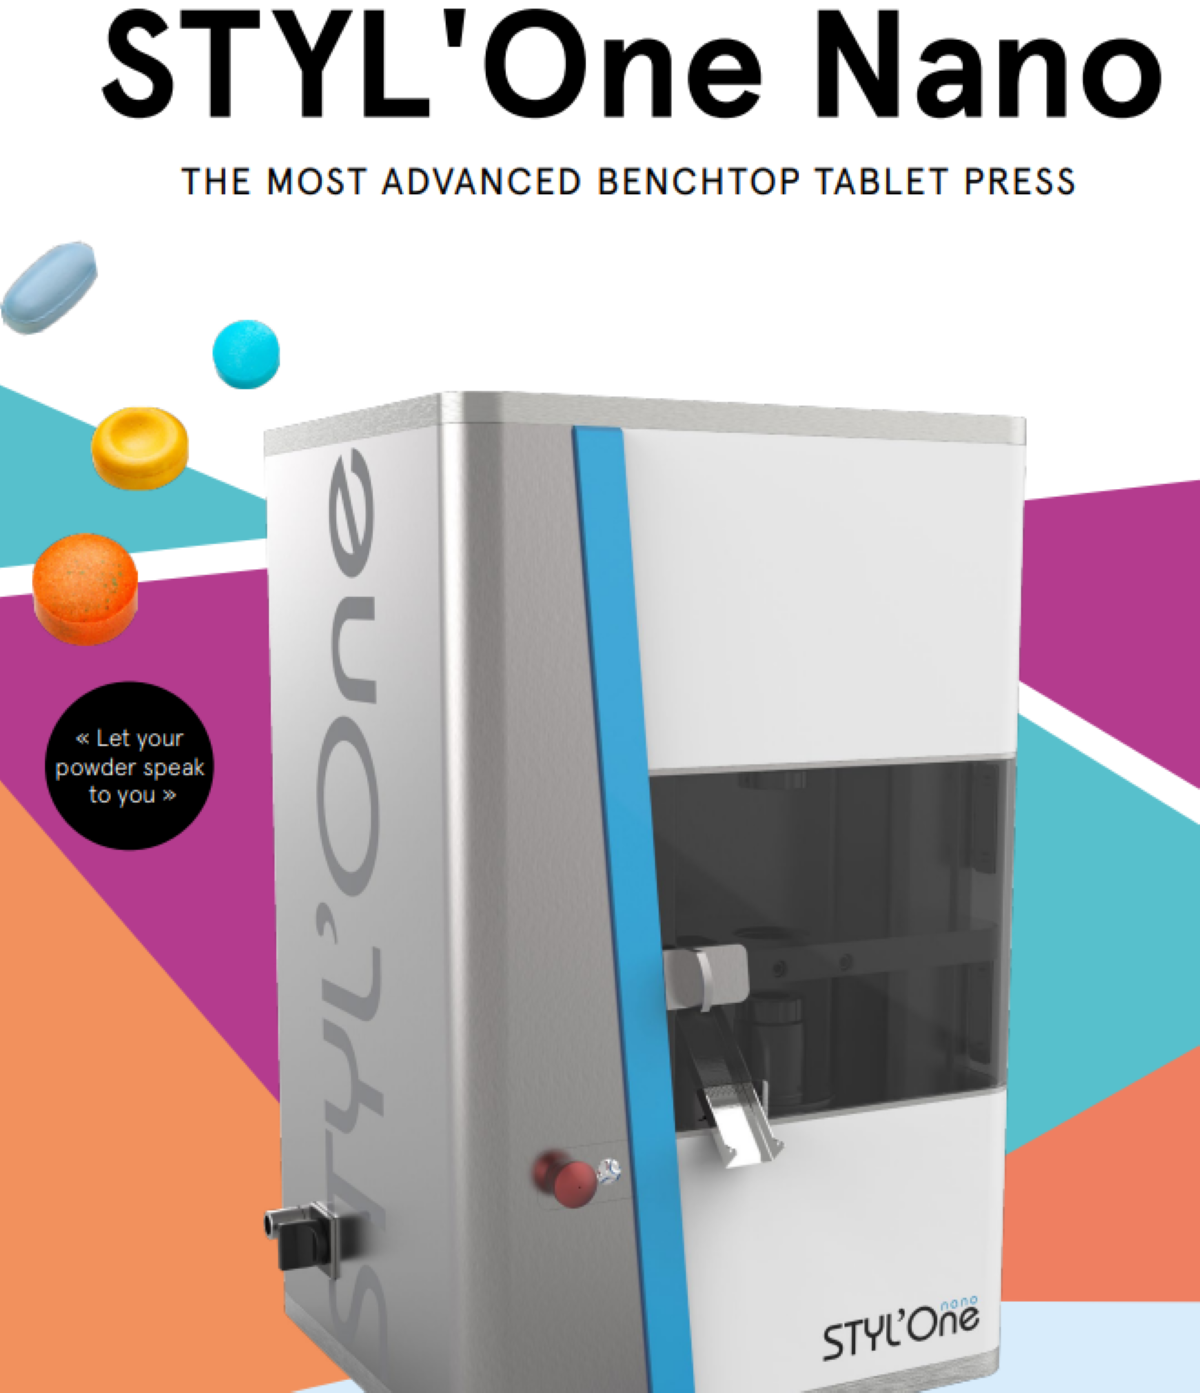 The most advanced Benchtop Tablet Press – STYL’One Nano